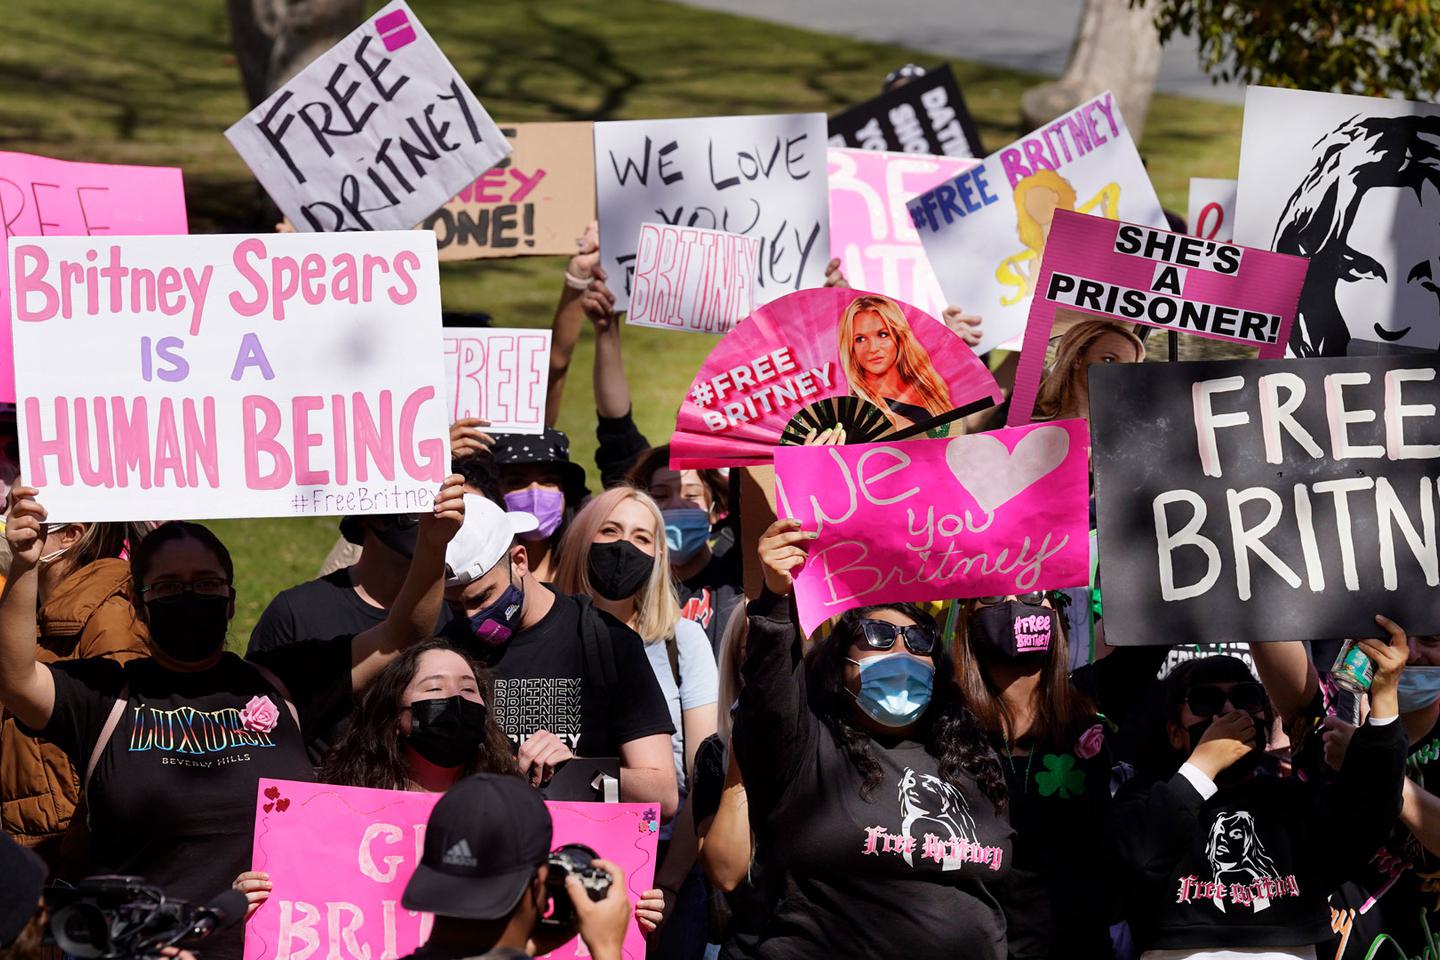 Britney Spears fans hold signs outside a Los Angeles court hearing concerning the pop singer’s conservatorship on March 17, 2021